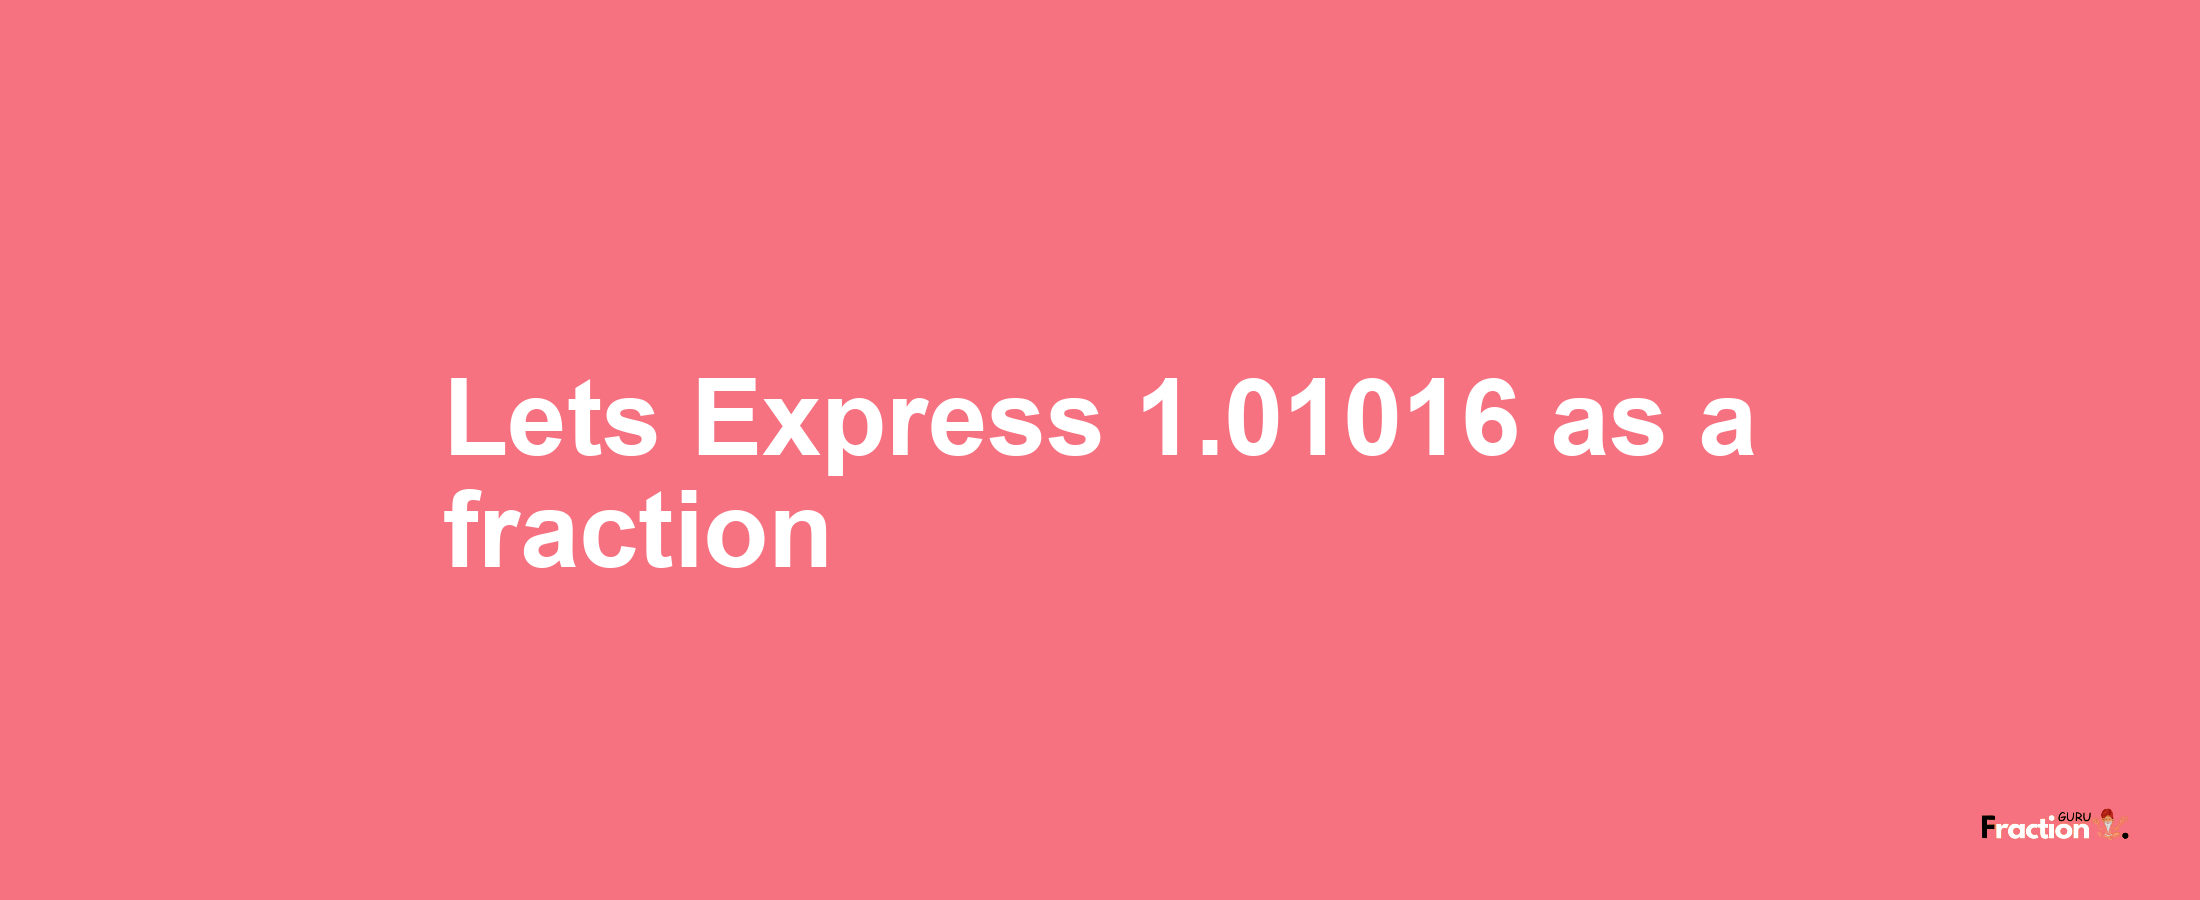 Lets Express 1.01016 as afraction